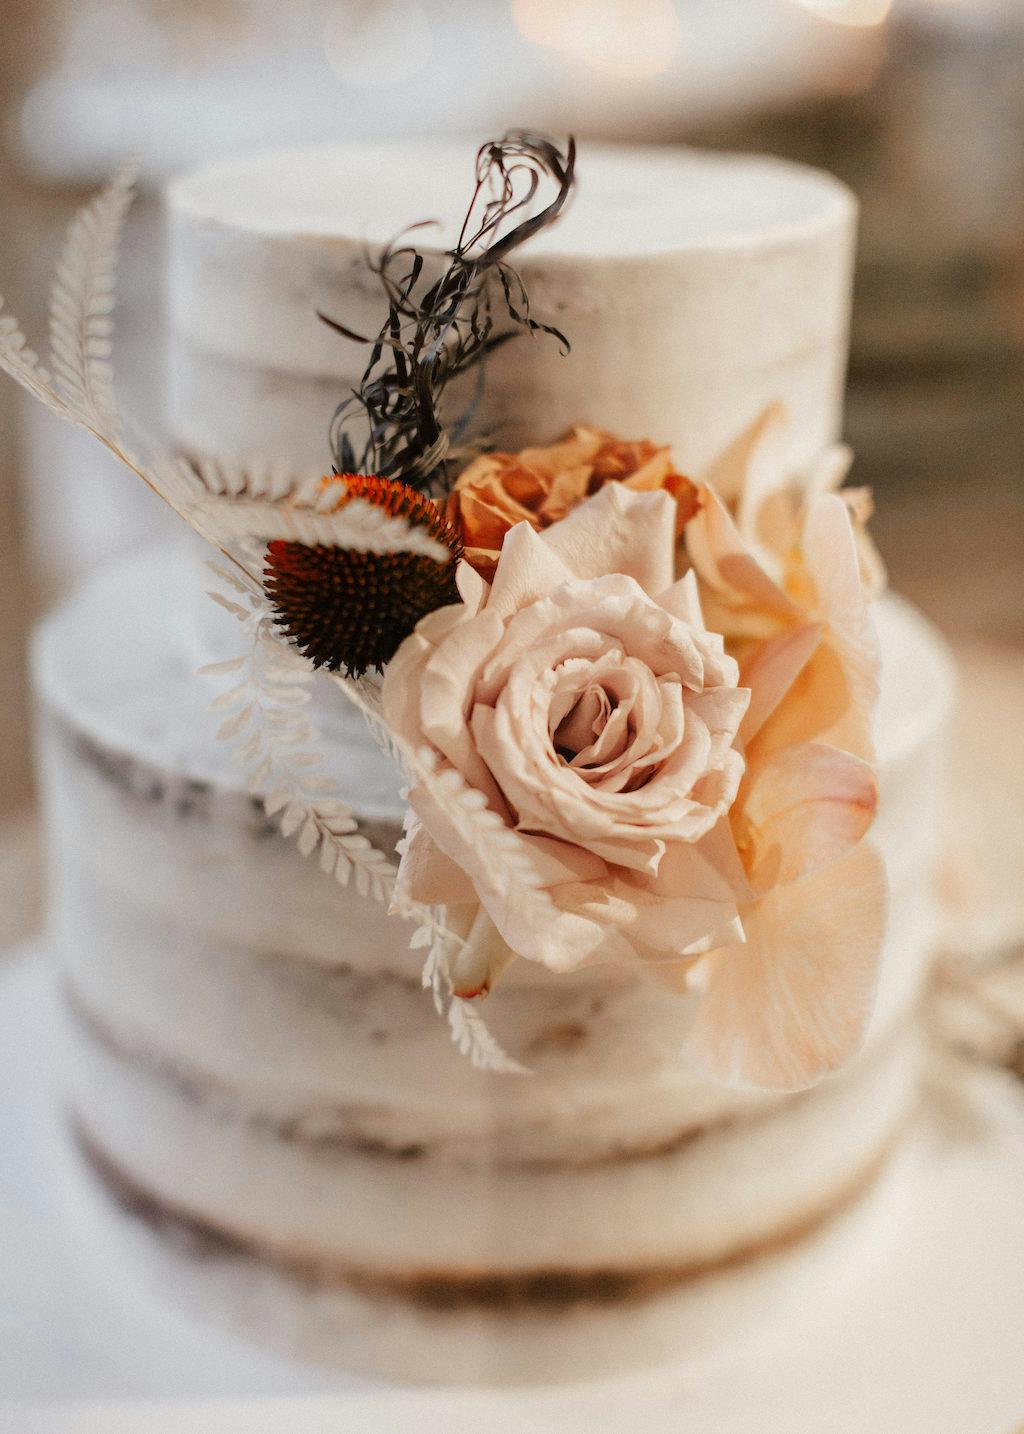 A two-tier, semi-naked wedding cake adorned with pale pink roses, dried orange flowers, and delicate white leaves, elegantly arranged in a natural, rustic style. The cake sits on a plain white surface with a softly blurred background.